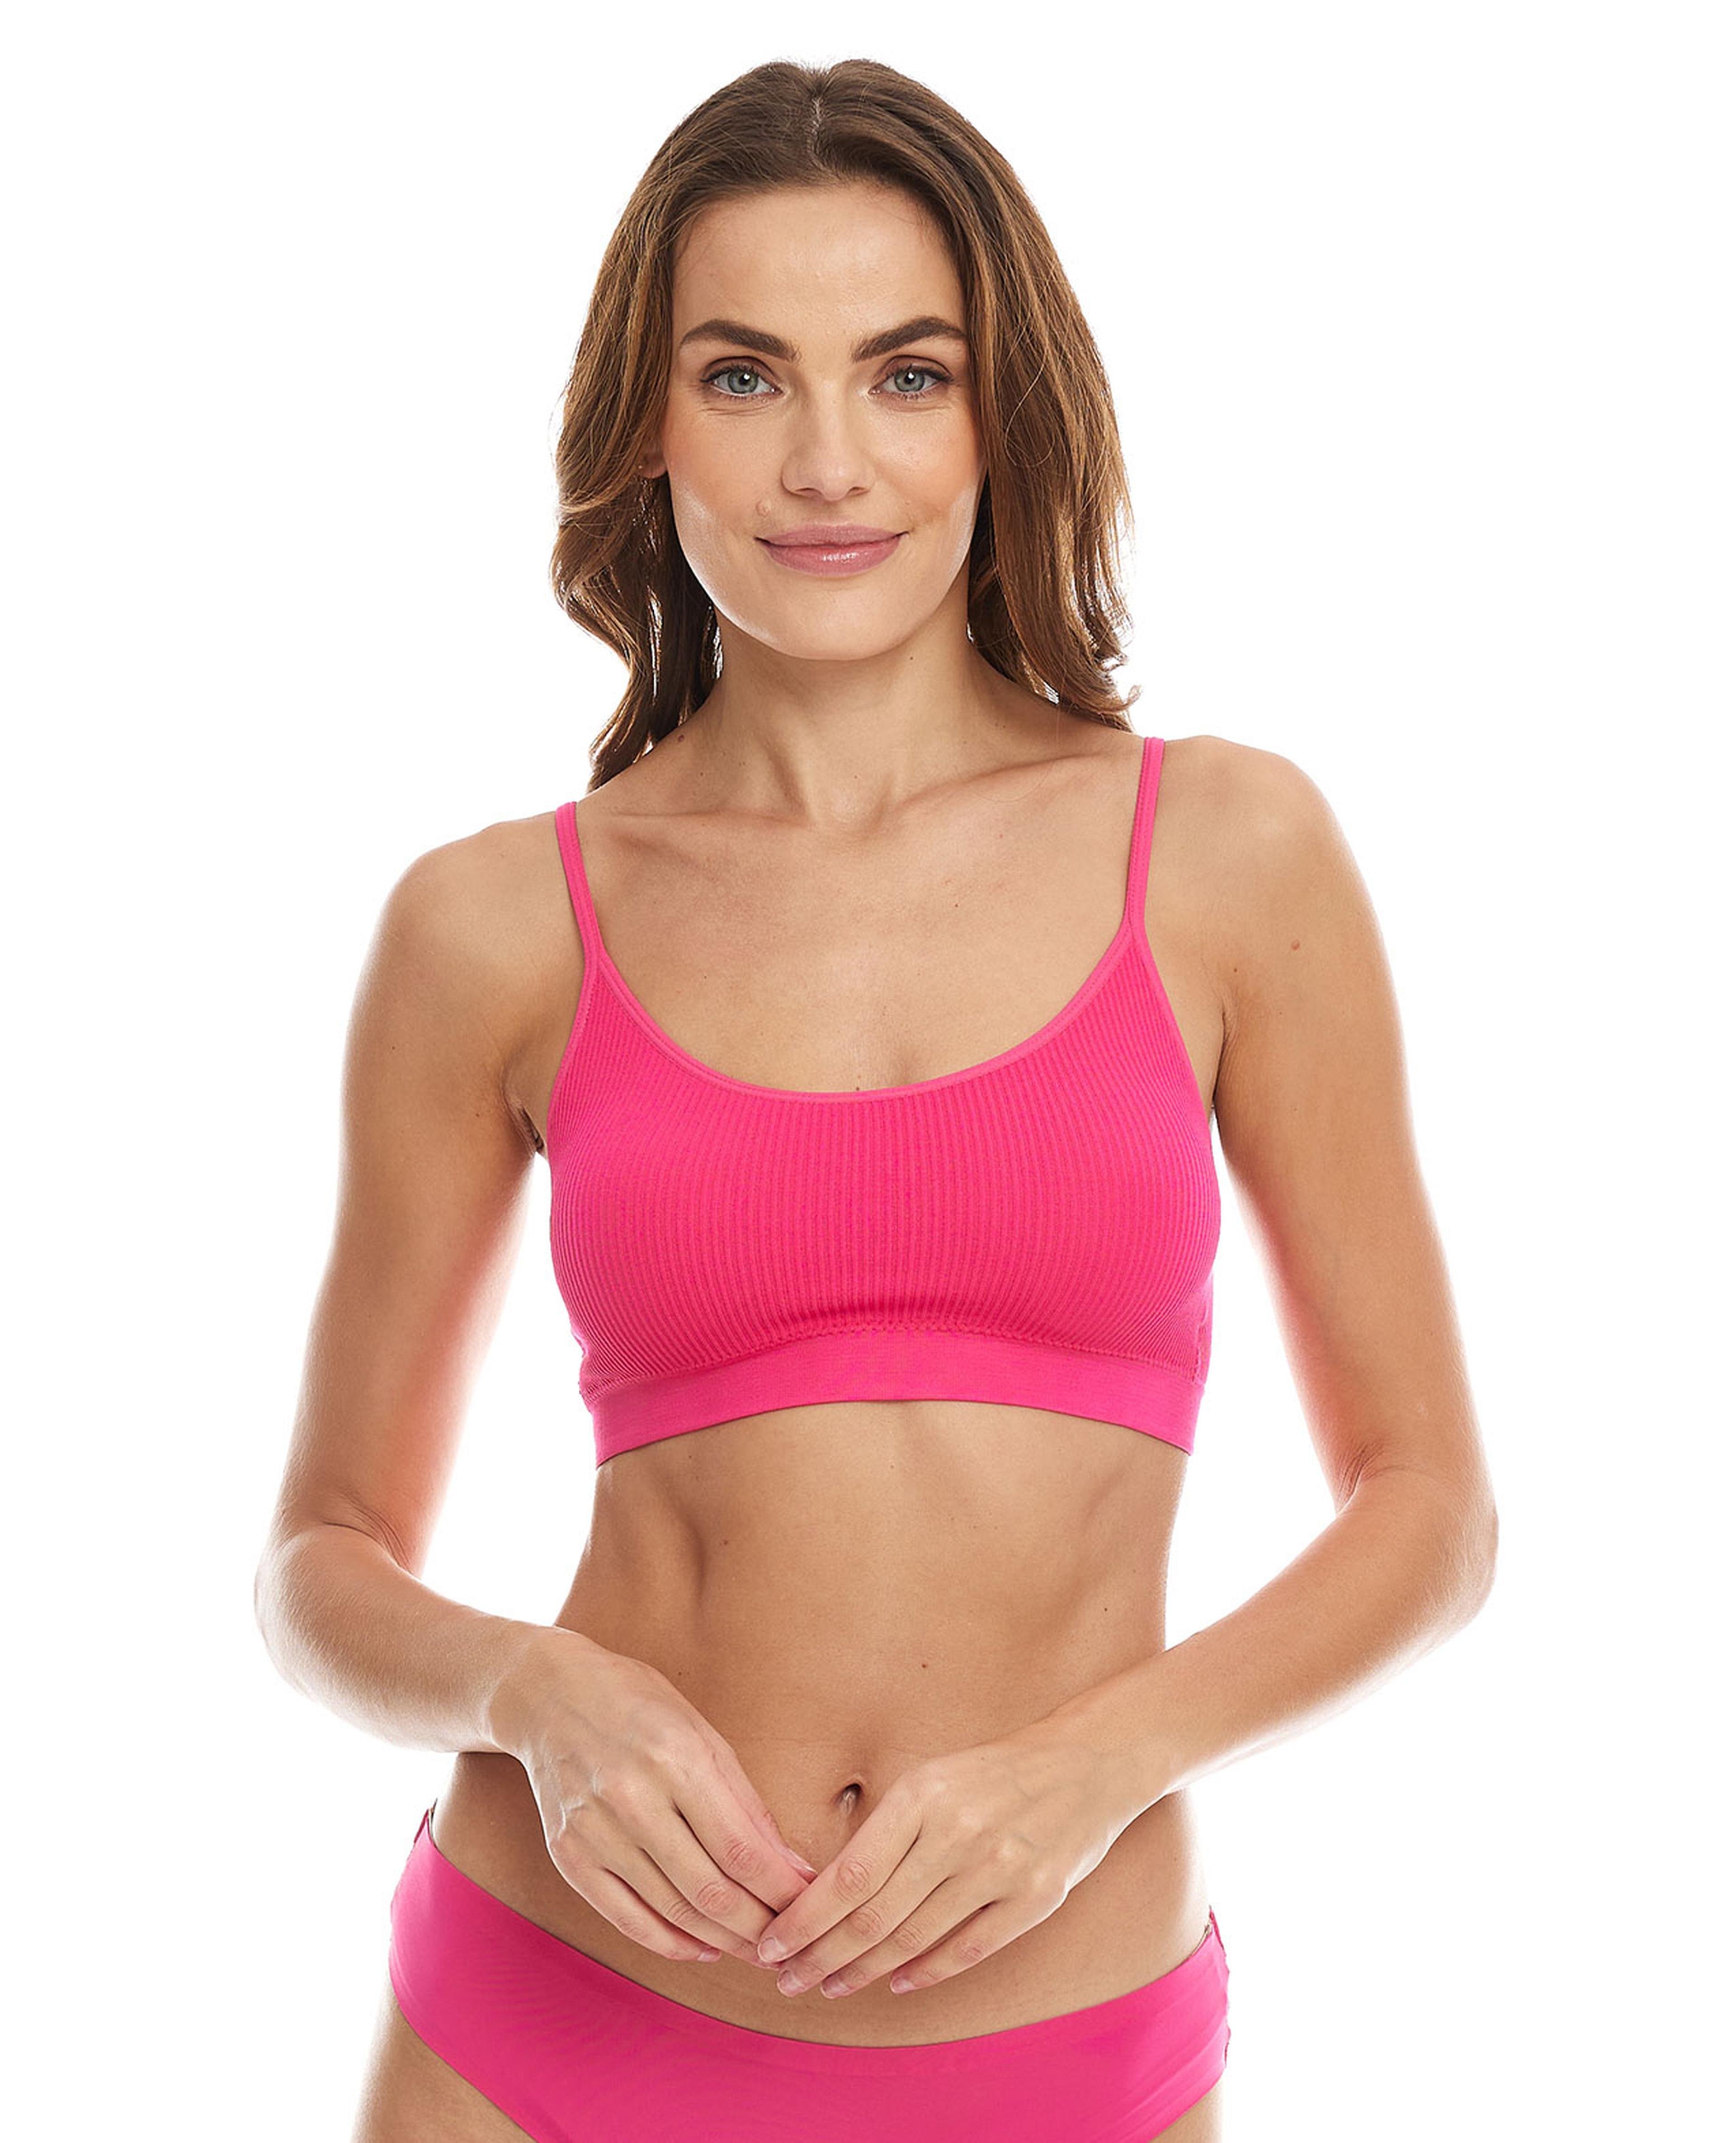 Minos Thick Padded Sports Bras for Women Women's Solid Color